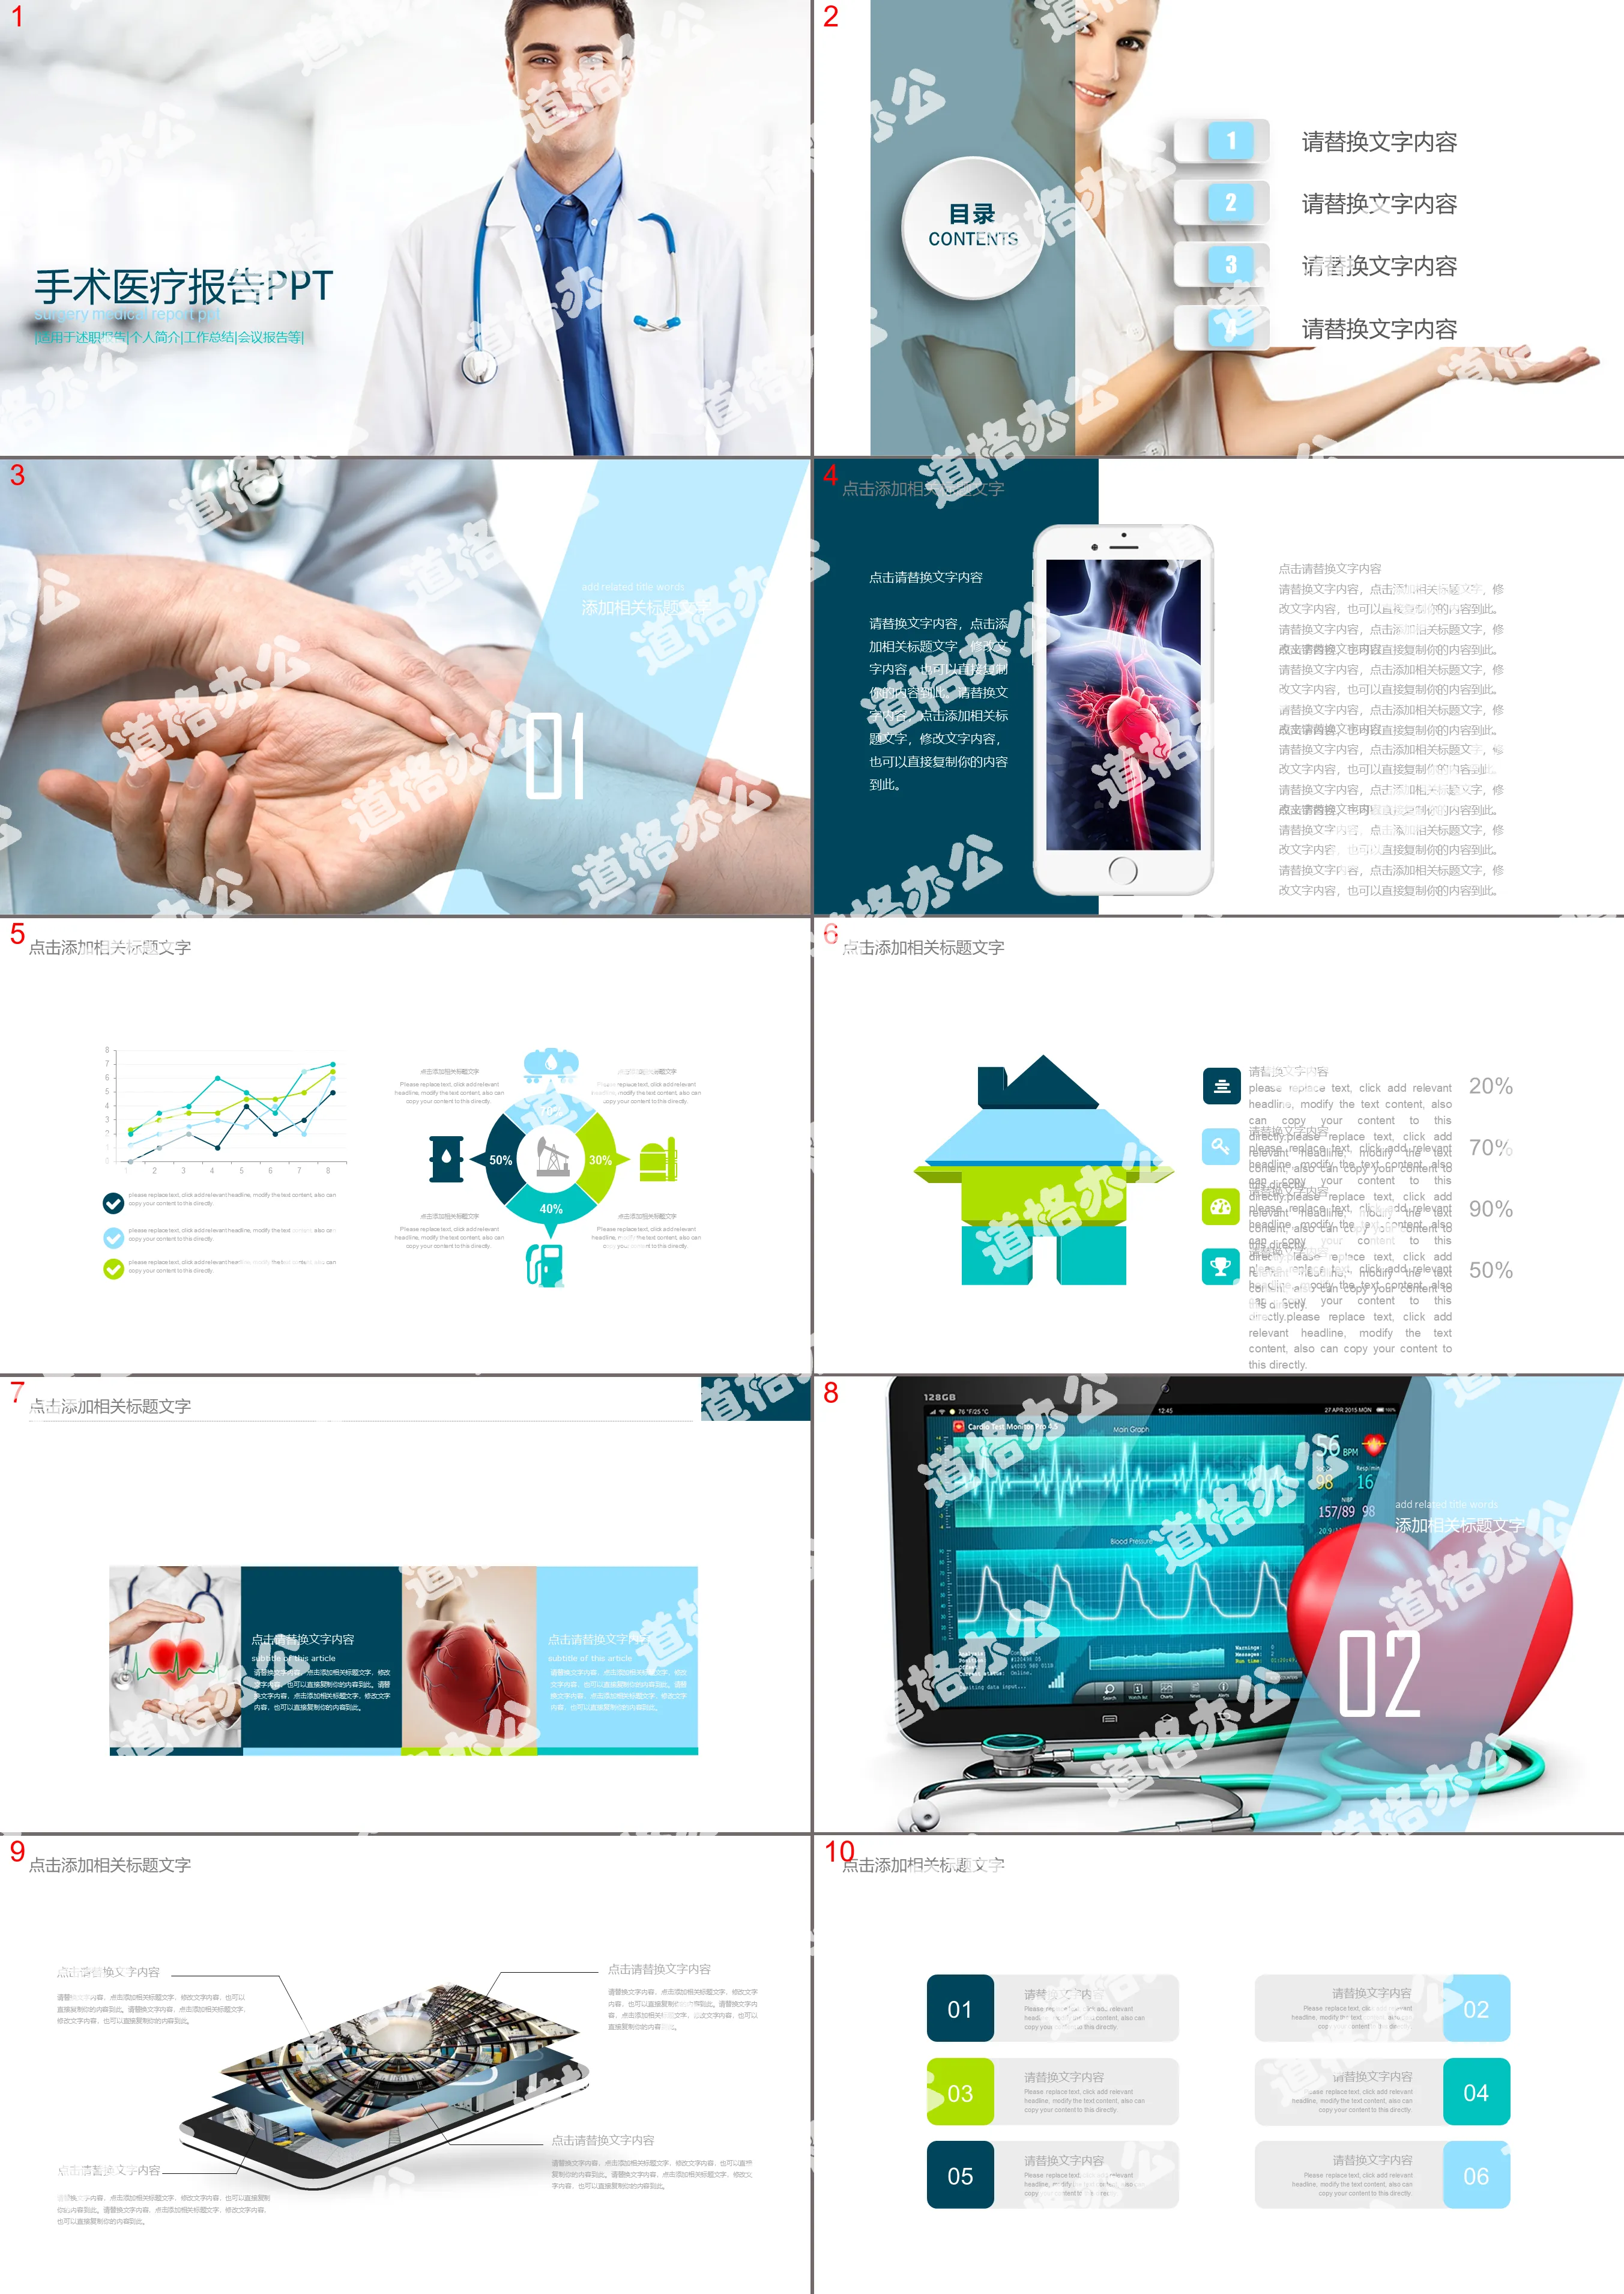 Hospital doctor surgery medical report PPT template